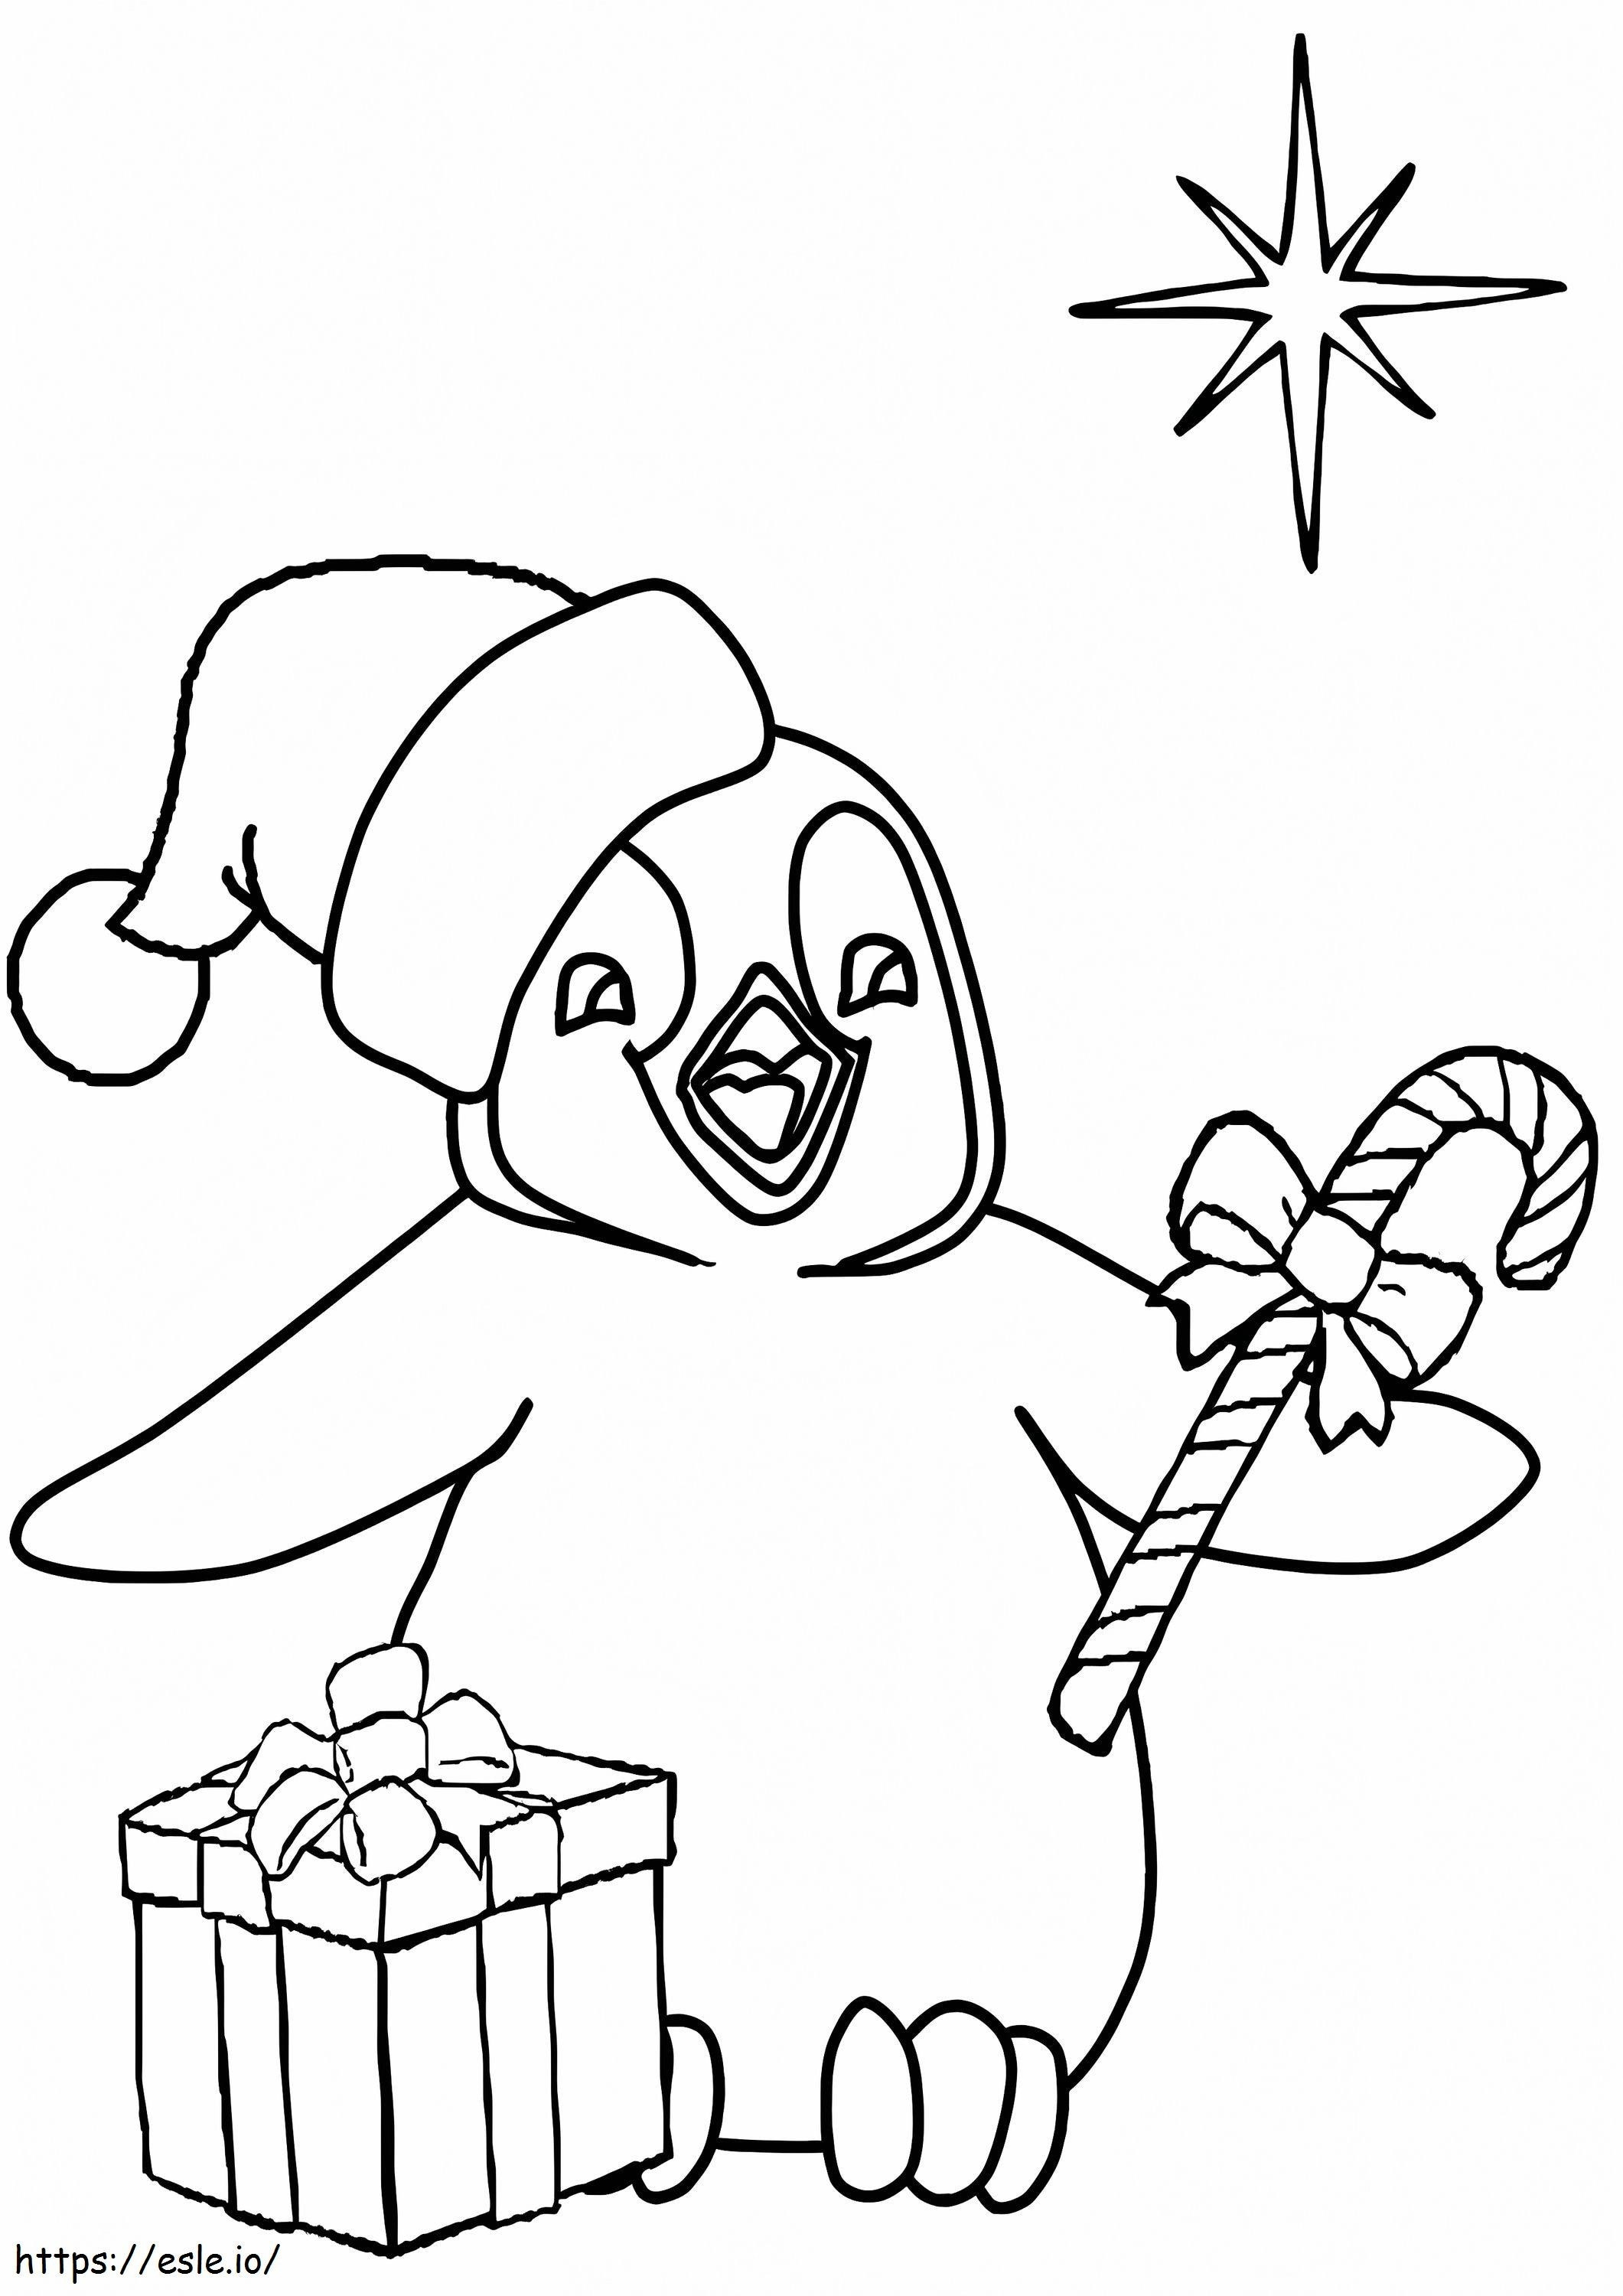 Christmas Penguin With Gift Box coloring page